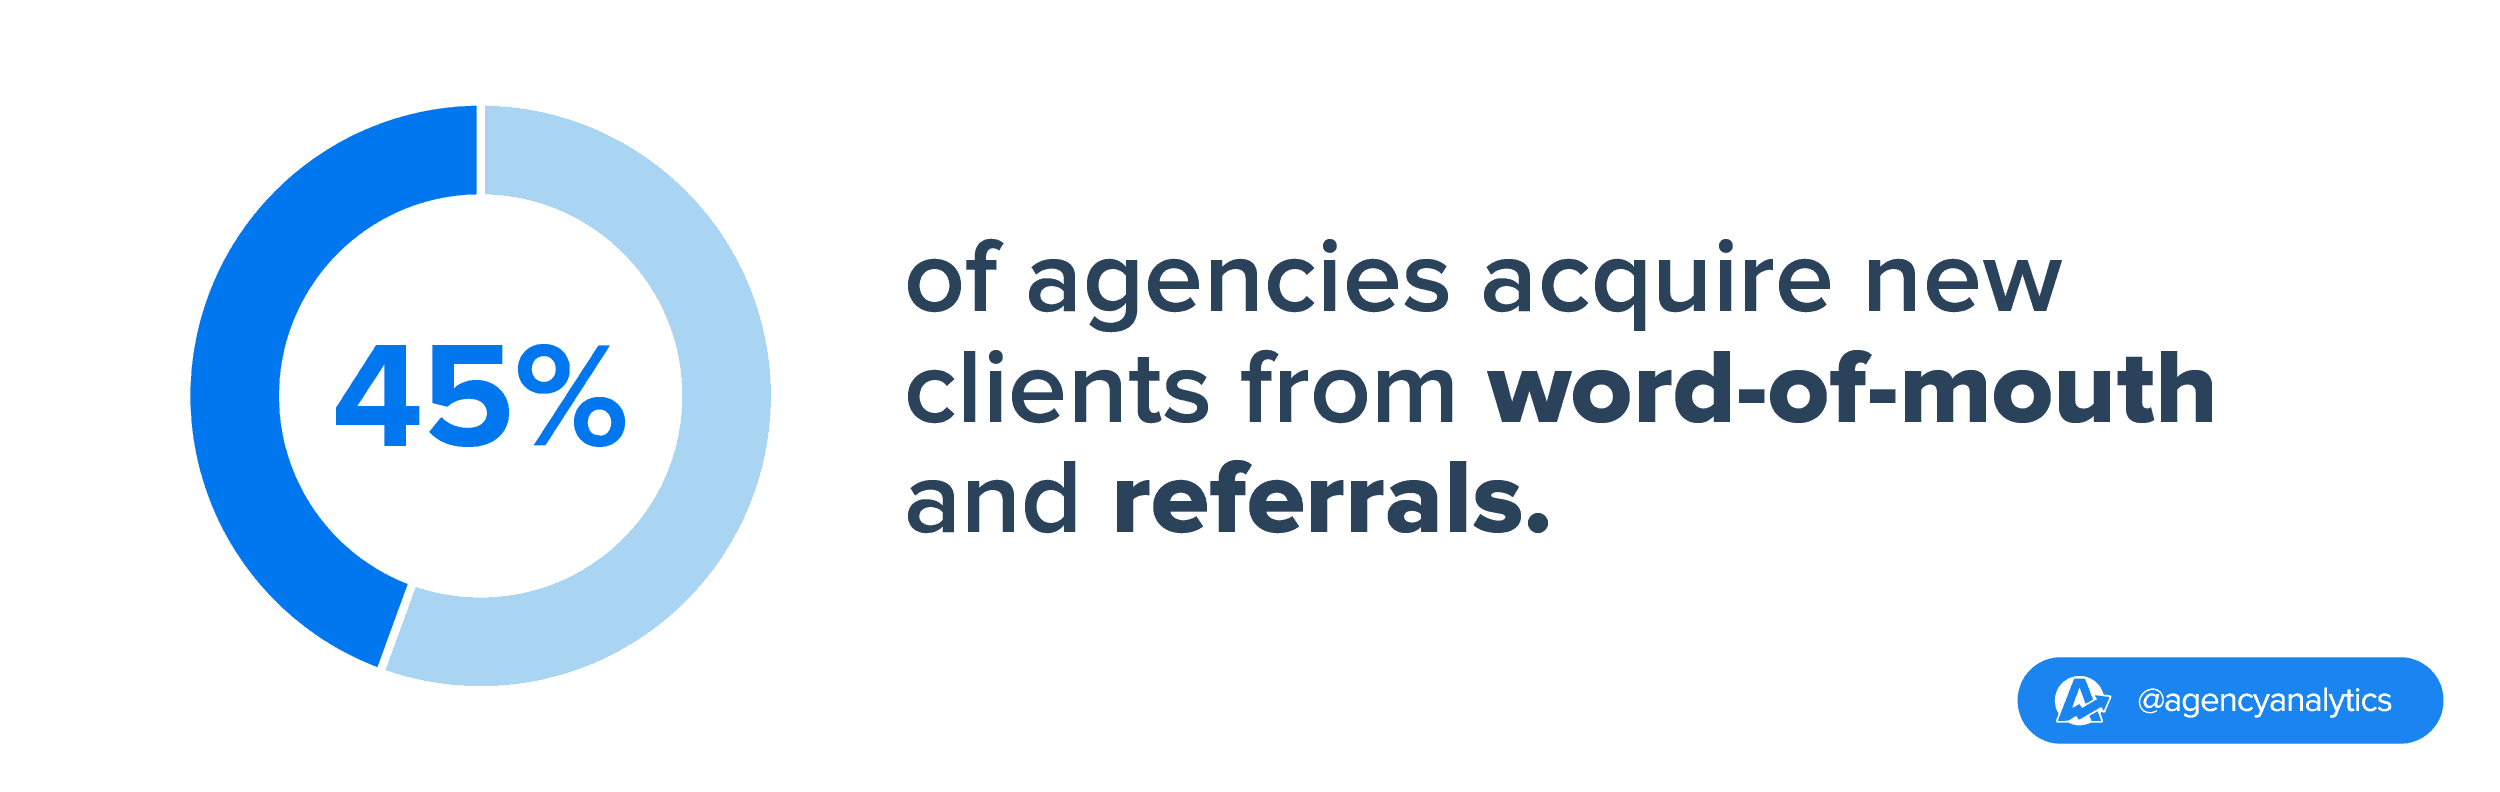 word of mouth referrals stats for agencies